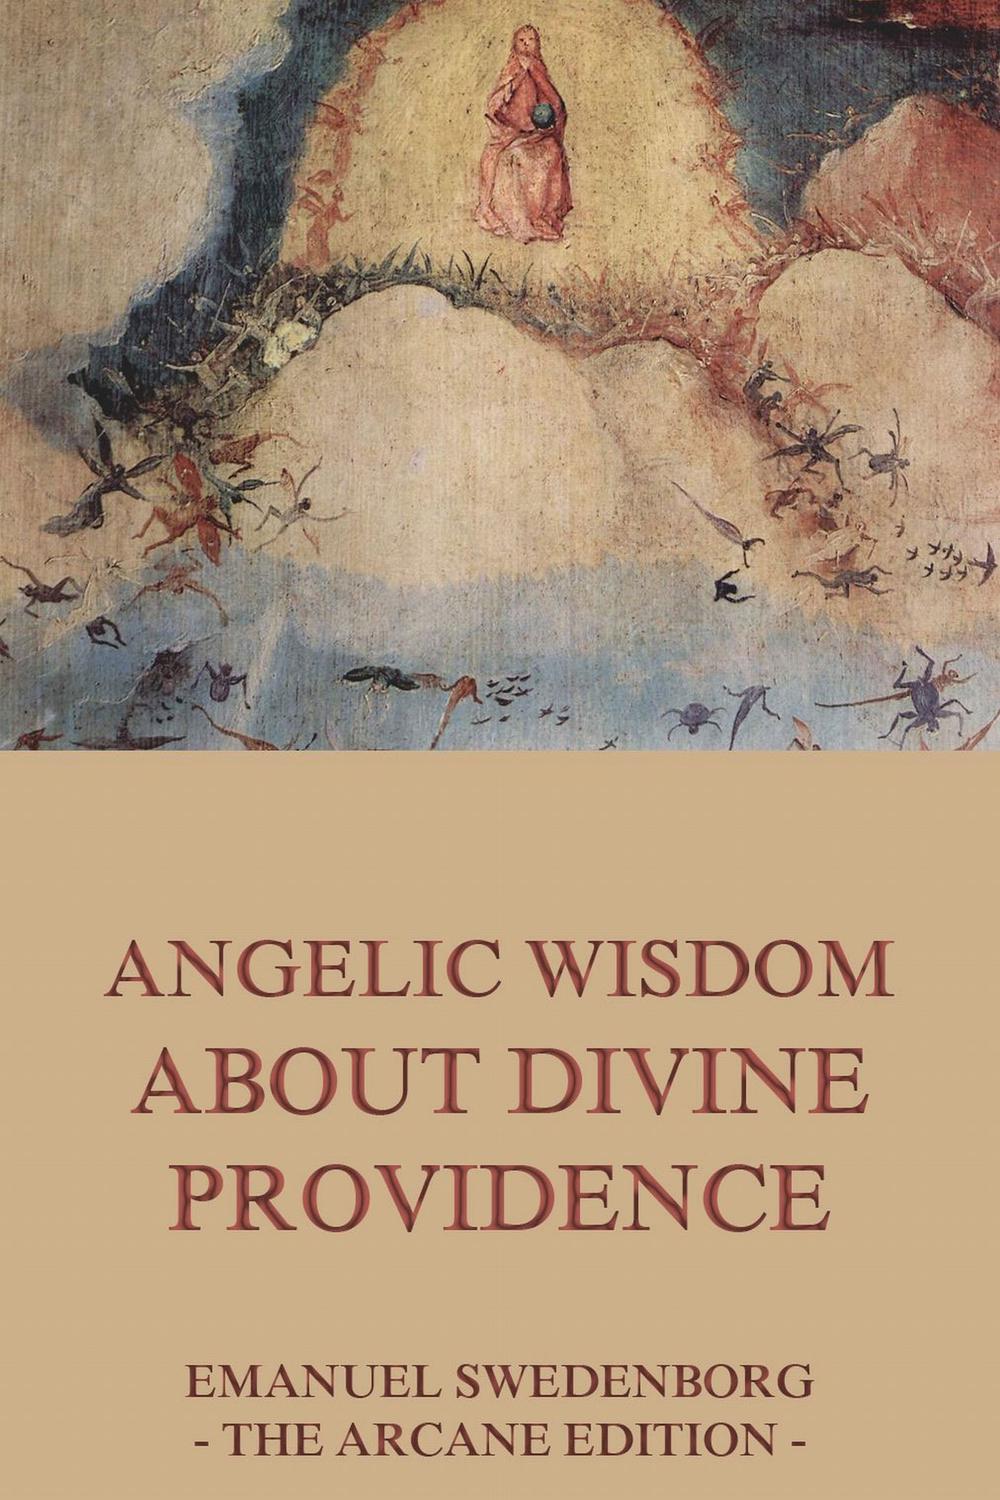 Angelic Wisdom about Divine Providence - Emanuel Swedenborg,William Frederic Wunsch,